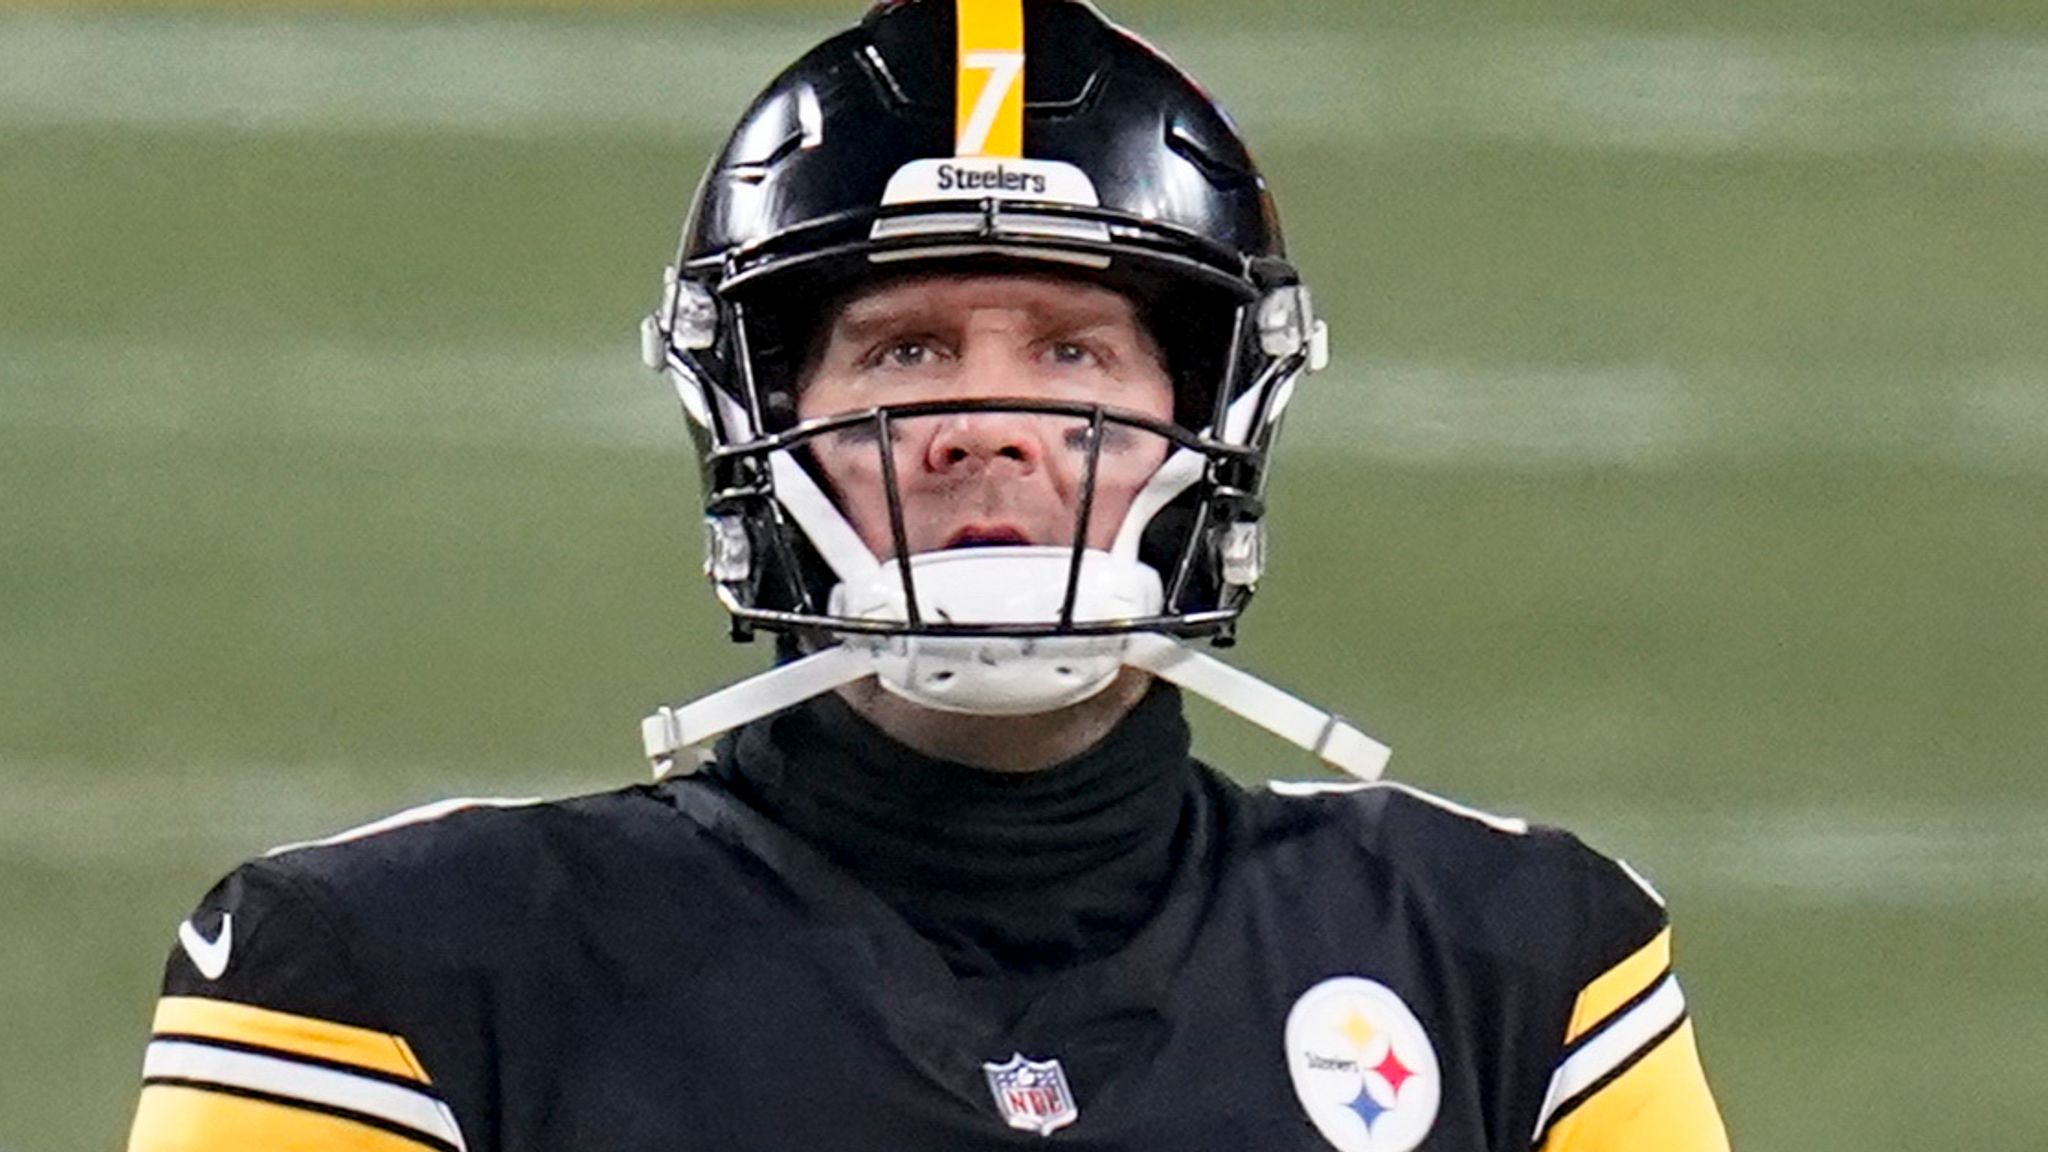 Ben Roethlisberger willing to adjust Pittsburgh Steelers salary after  president Art Rooney II's comments, NFL News